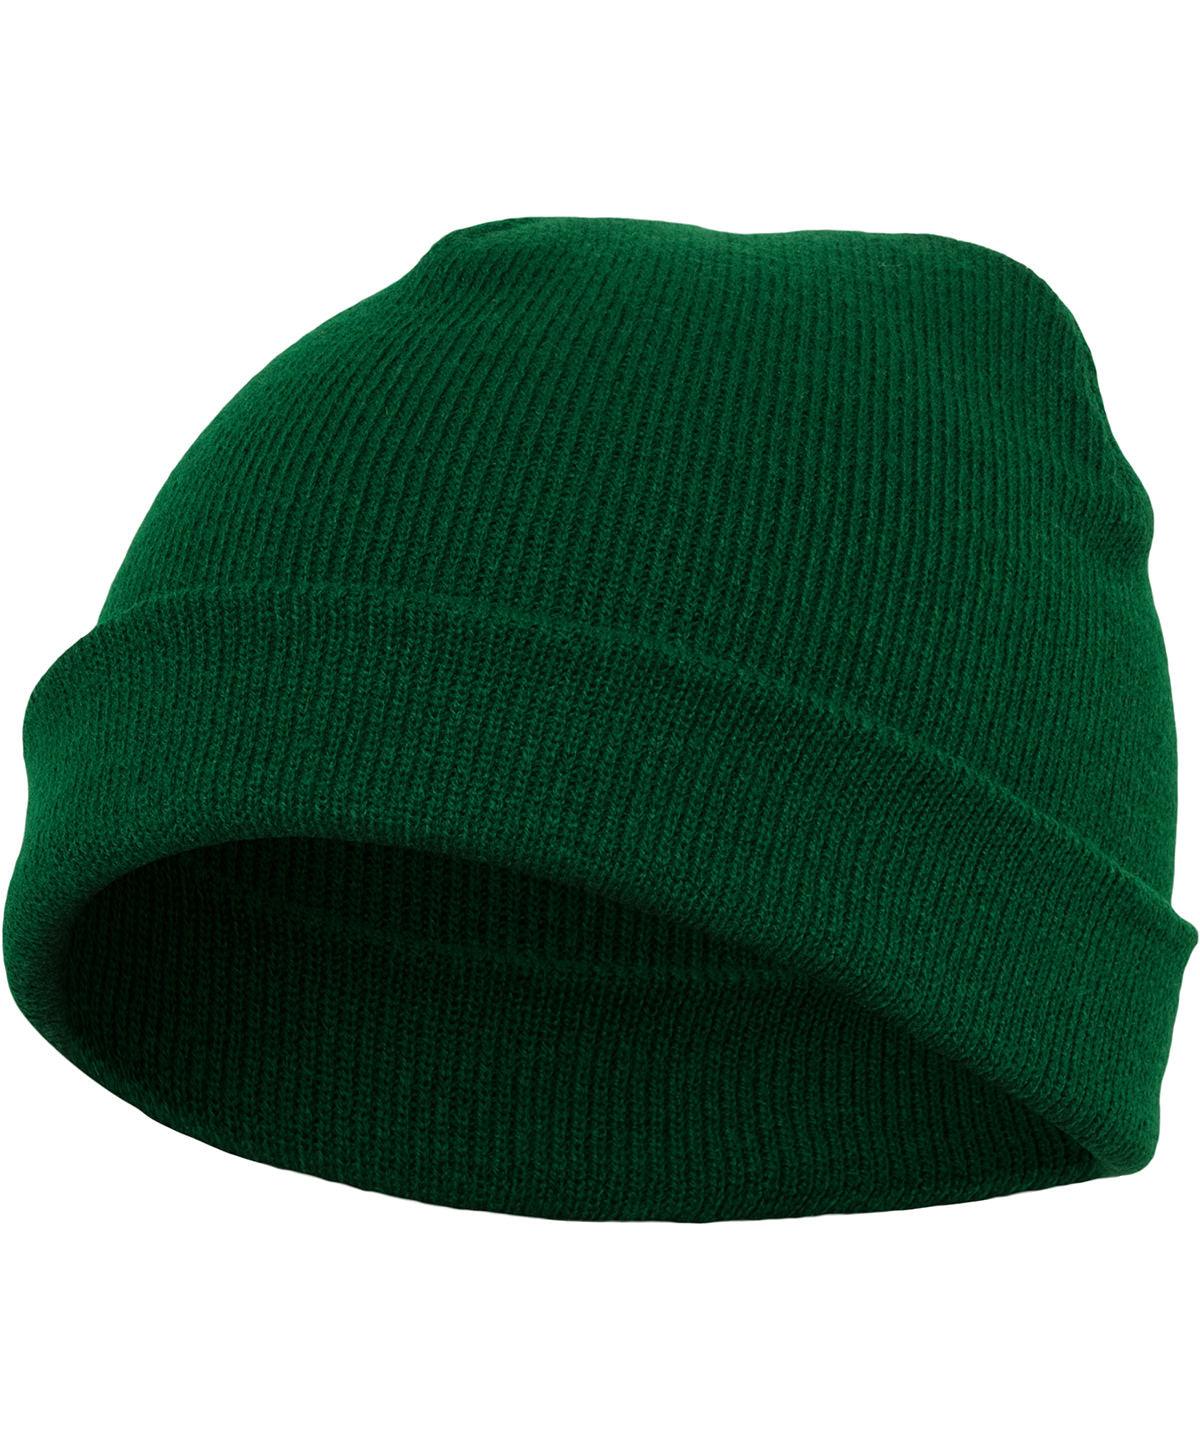 Spruce - Heavyweight beanie (1500KC) Hats Flexfit by Yupoong Headwear, New Colours for 2023, Winter Essentials Schoolwear Centres